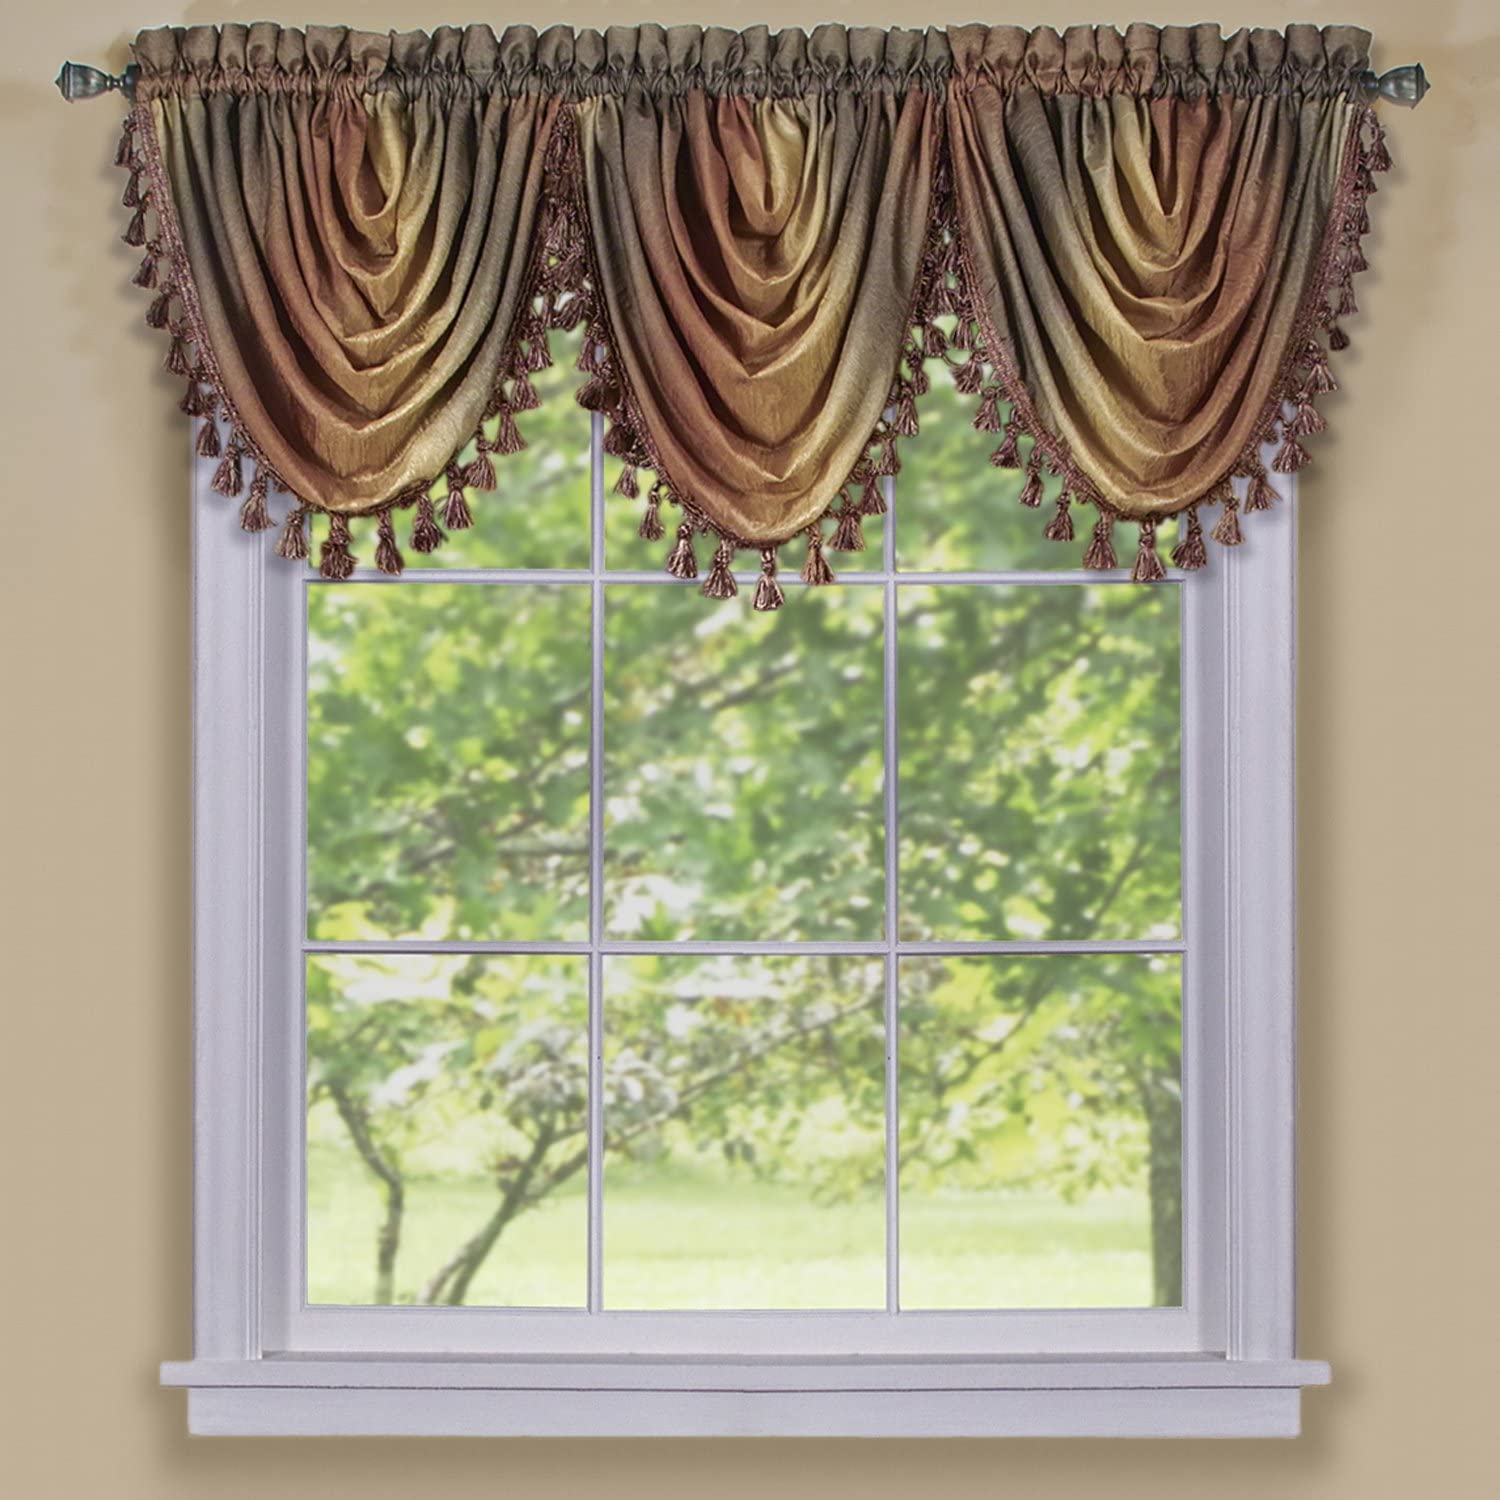 Achim Home Furnishings Ombre Waterfall Valance